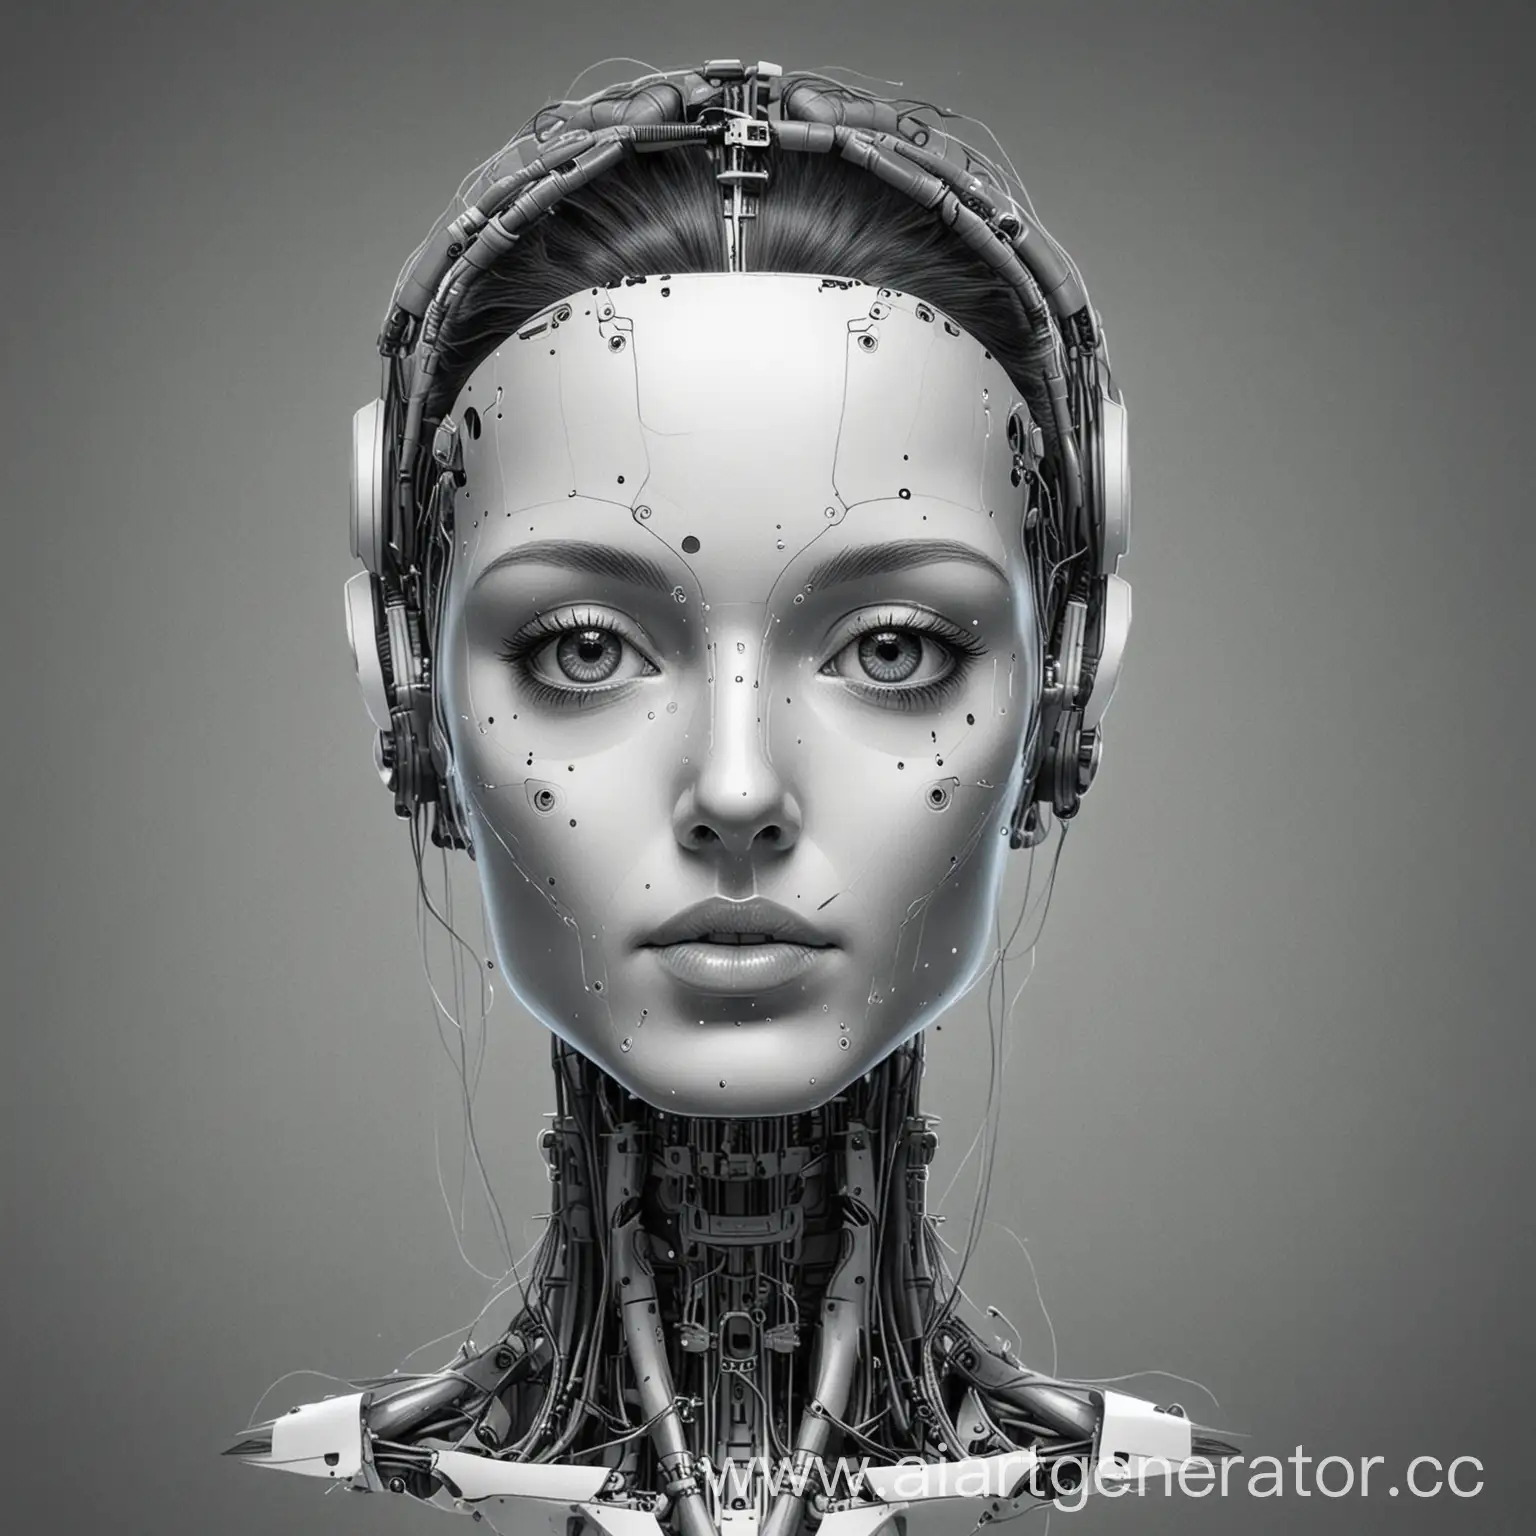 Futuristic-Concept-of-Artificial-Intelligence-in-a-Virtual-Environment